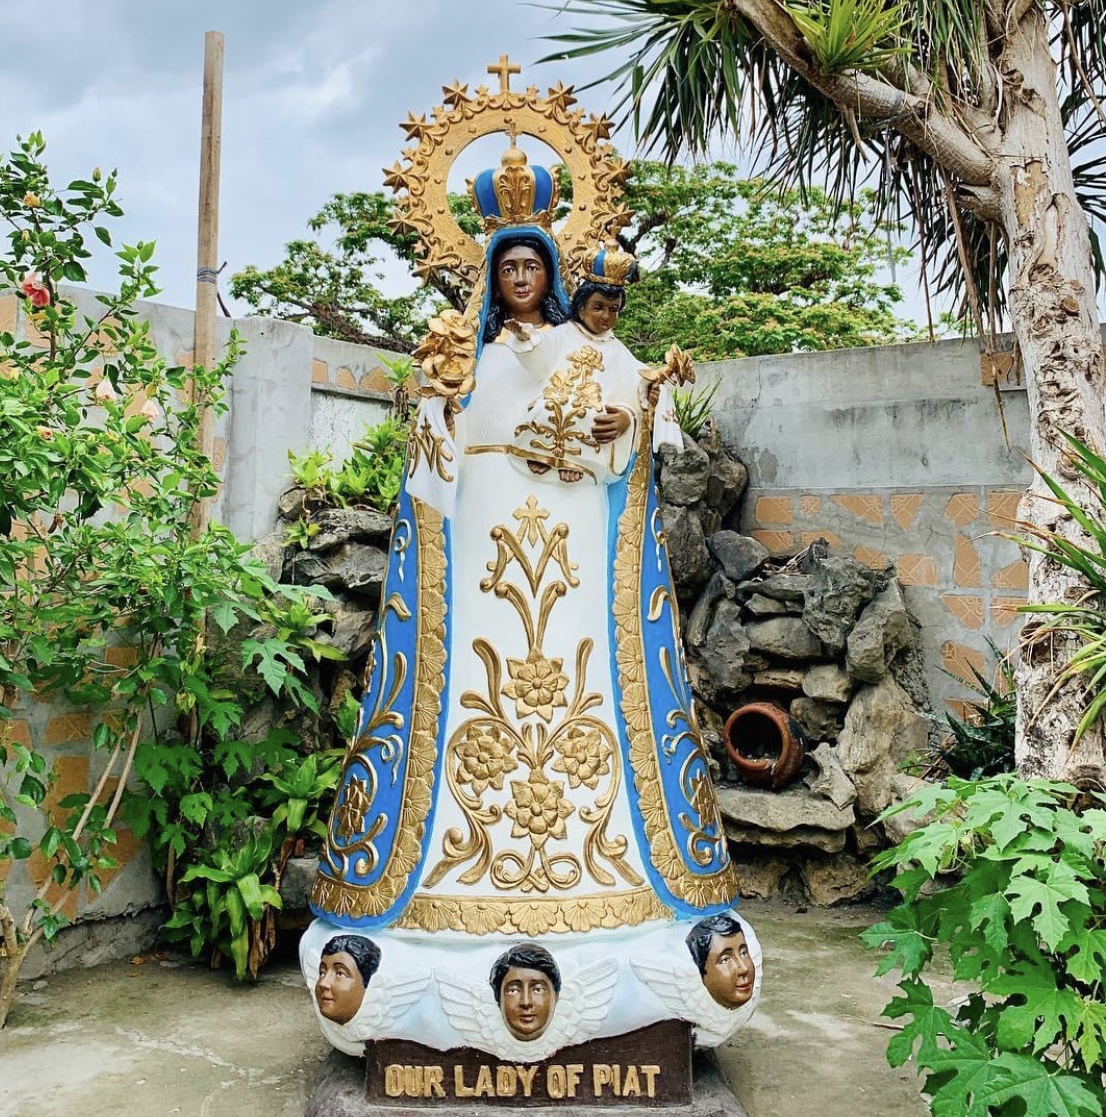 Our Lady of Piat, Piat